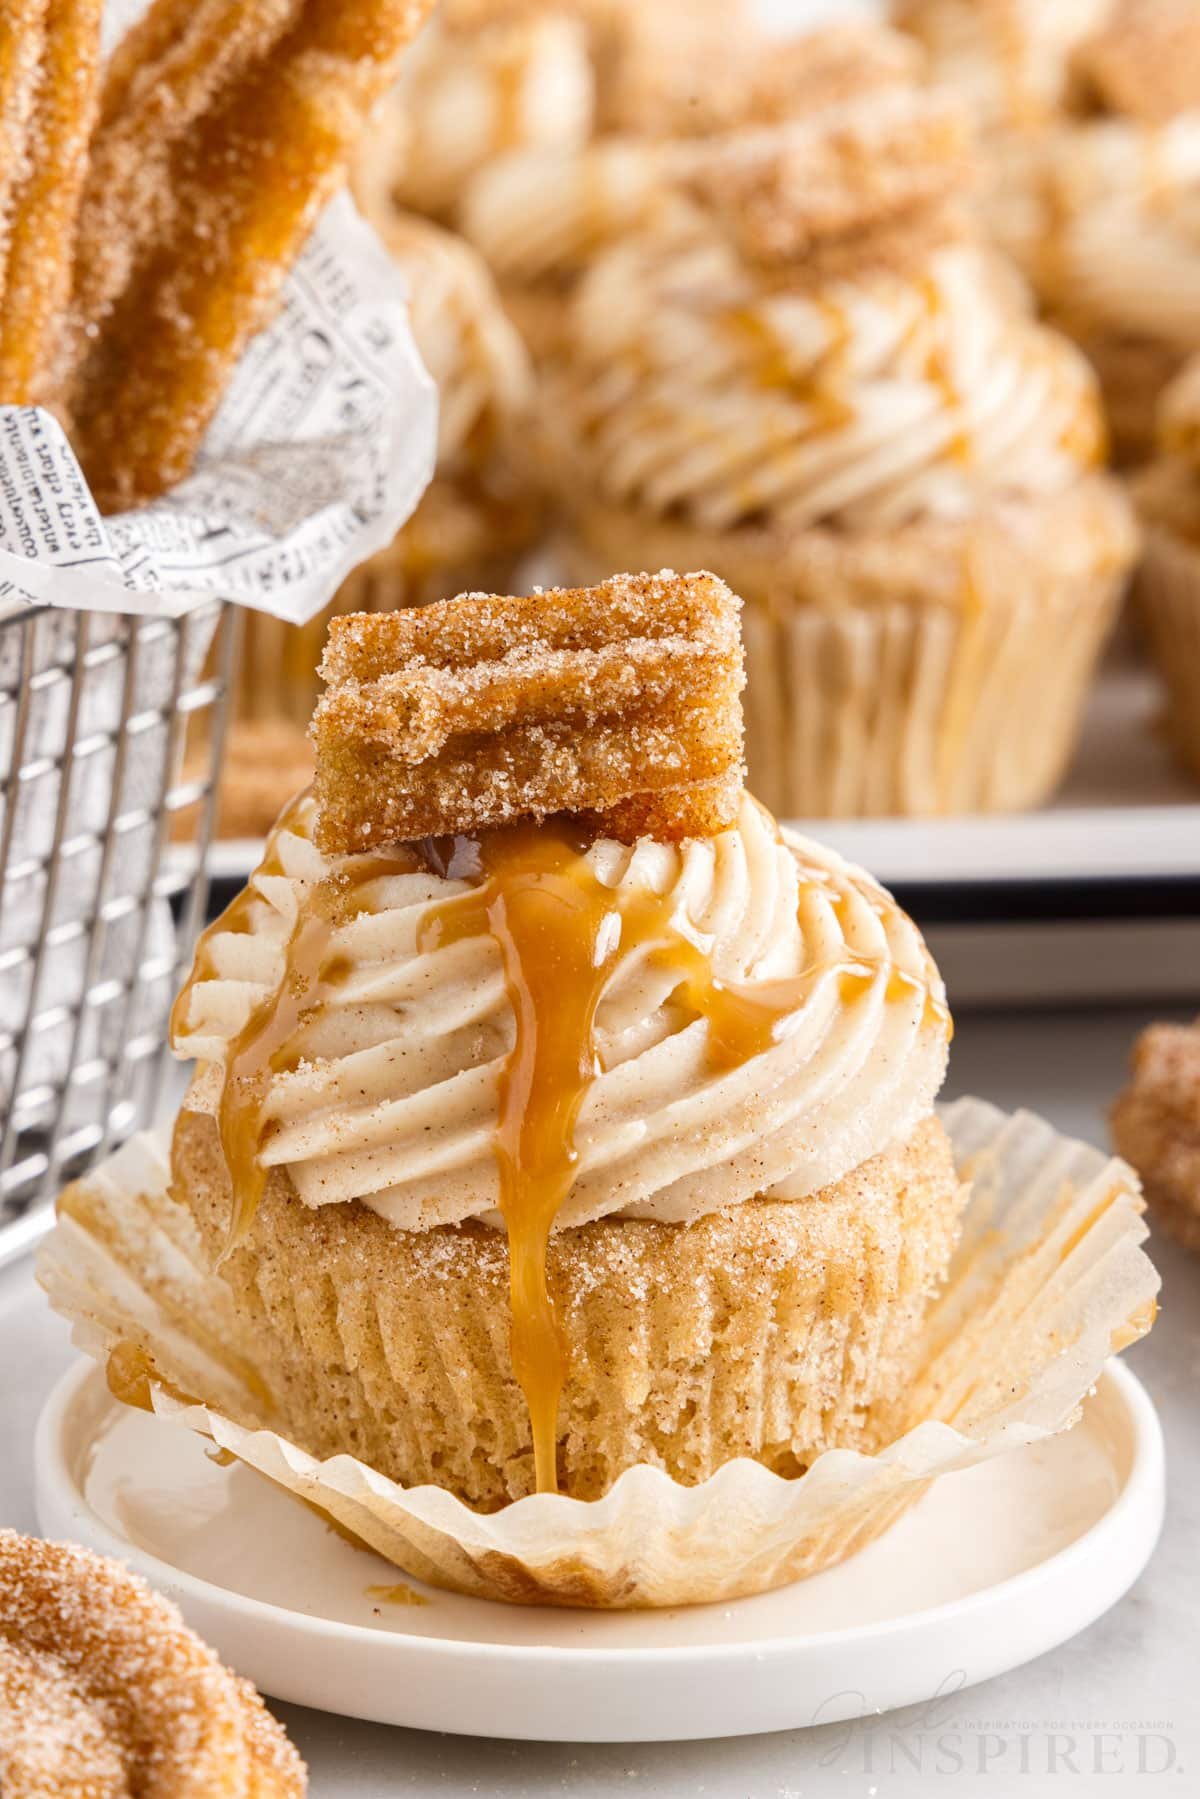 Paper peeled down from a Churro Cupcake on a dish, Churros and additional Churro Cupcakes in the background.